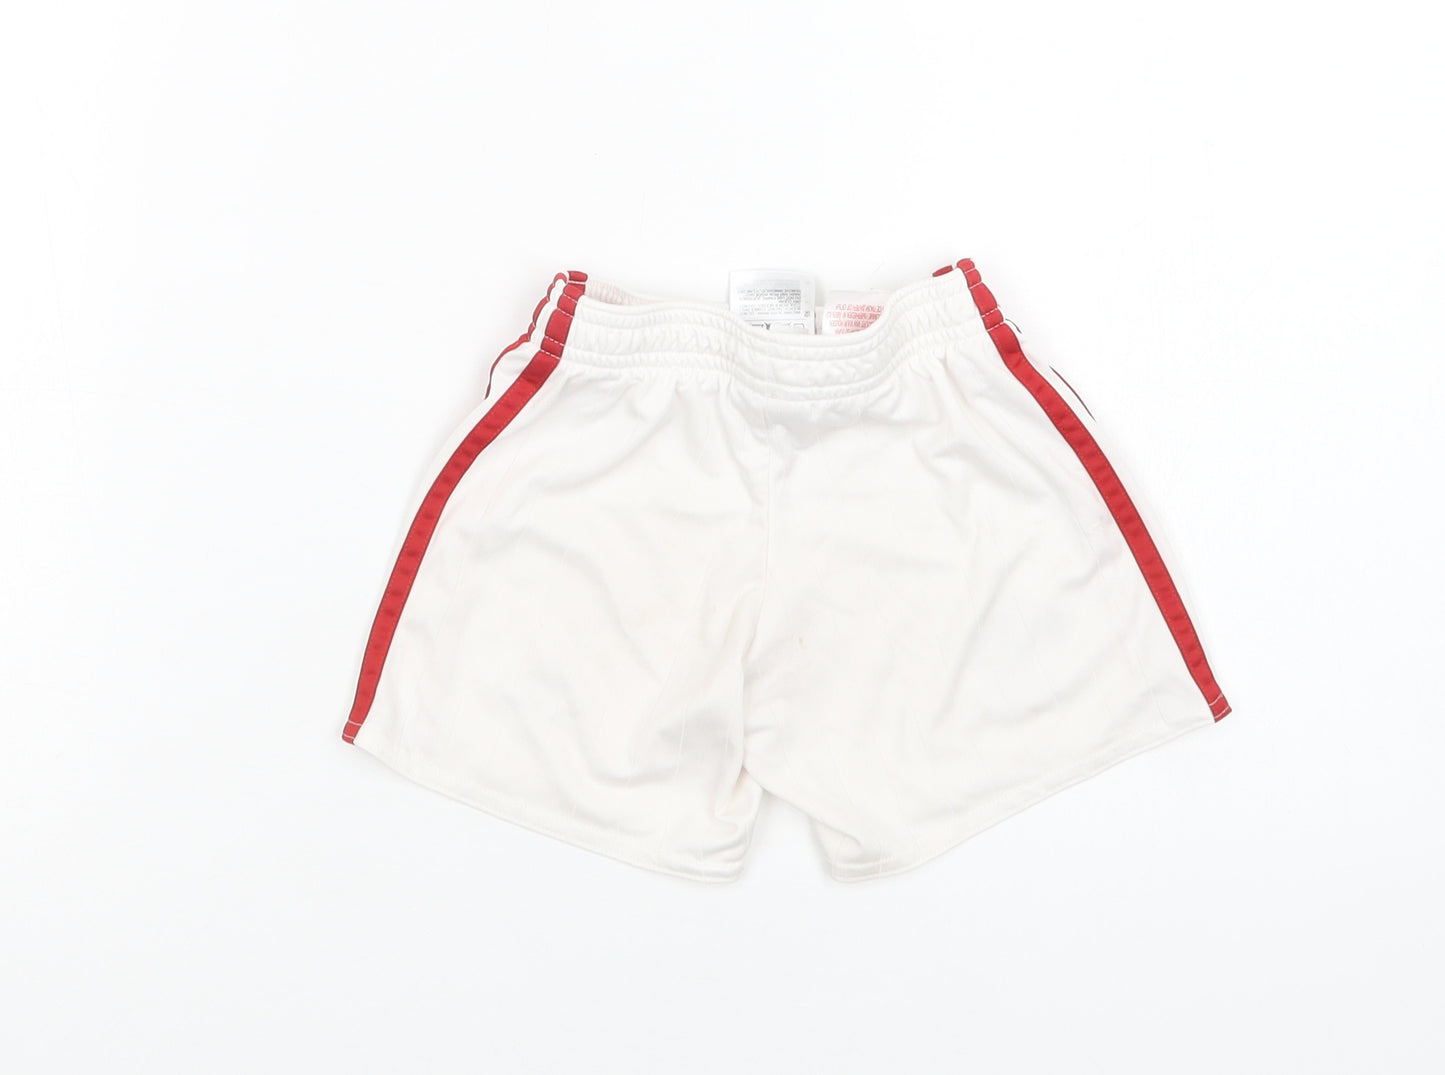 adidas Boys White Striped Polyester Sweat Shorts Size 2-3 Years  Regular  - Manchester United FC